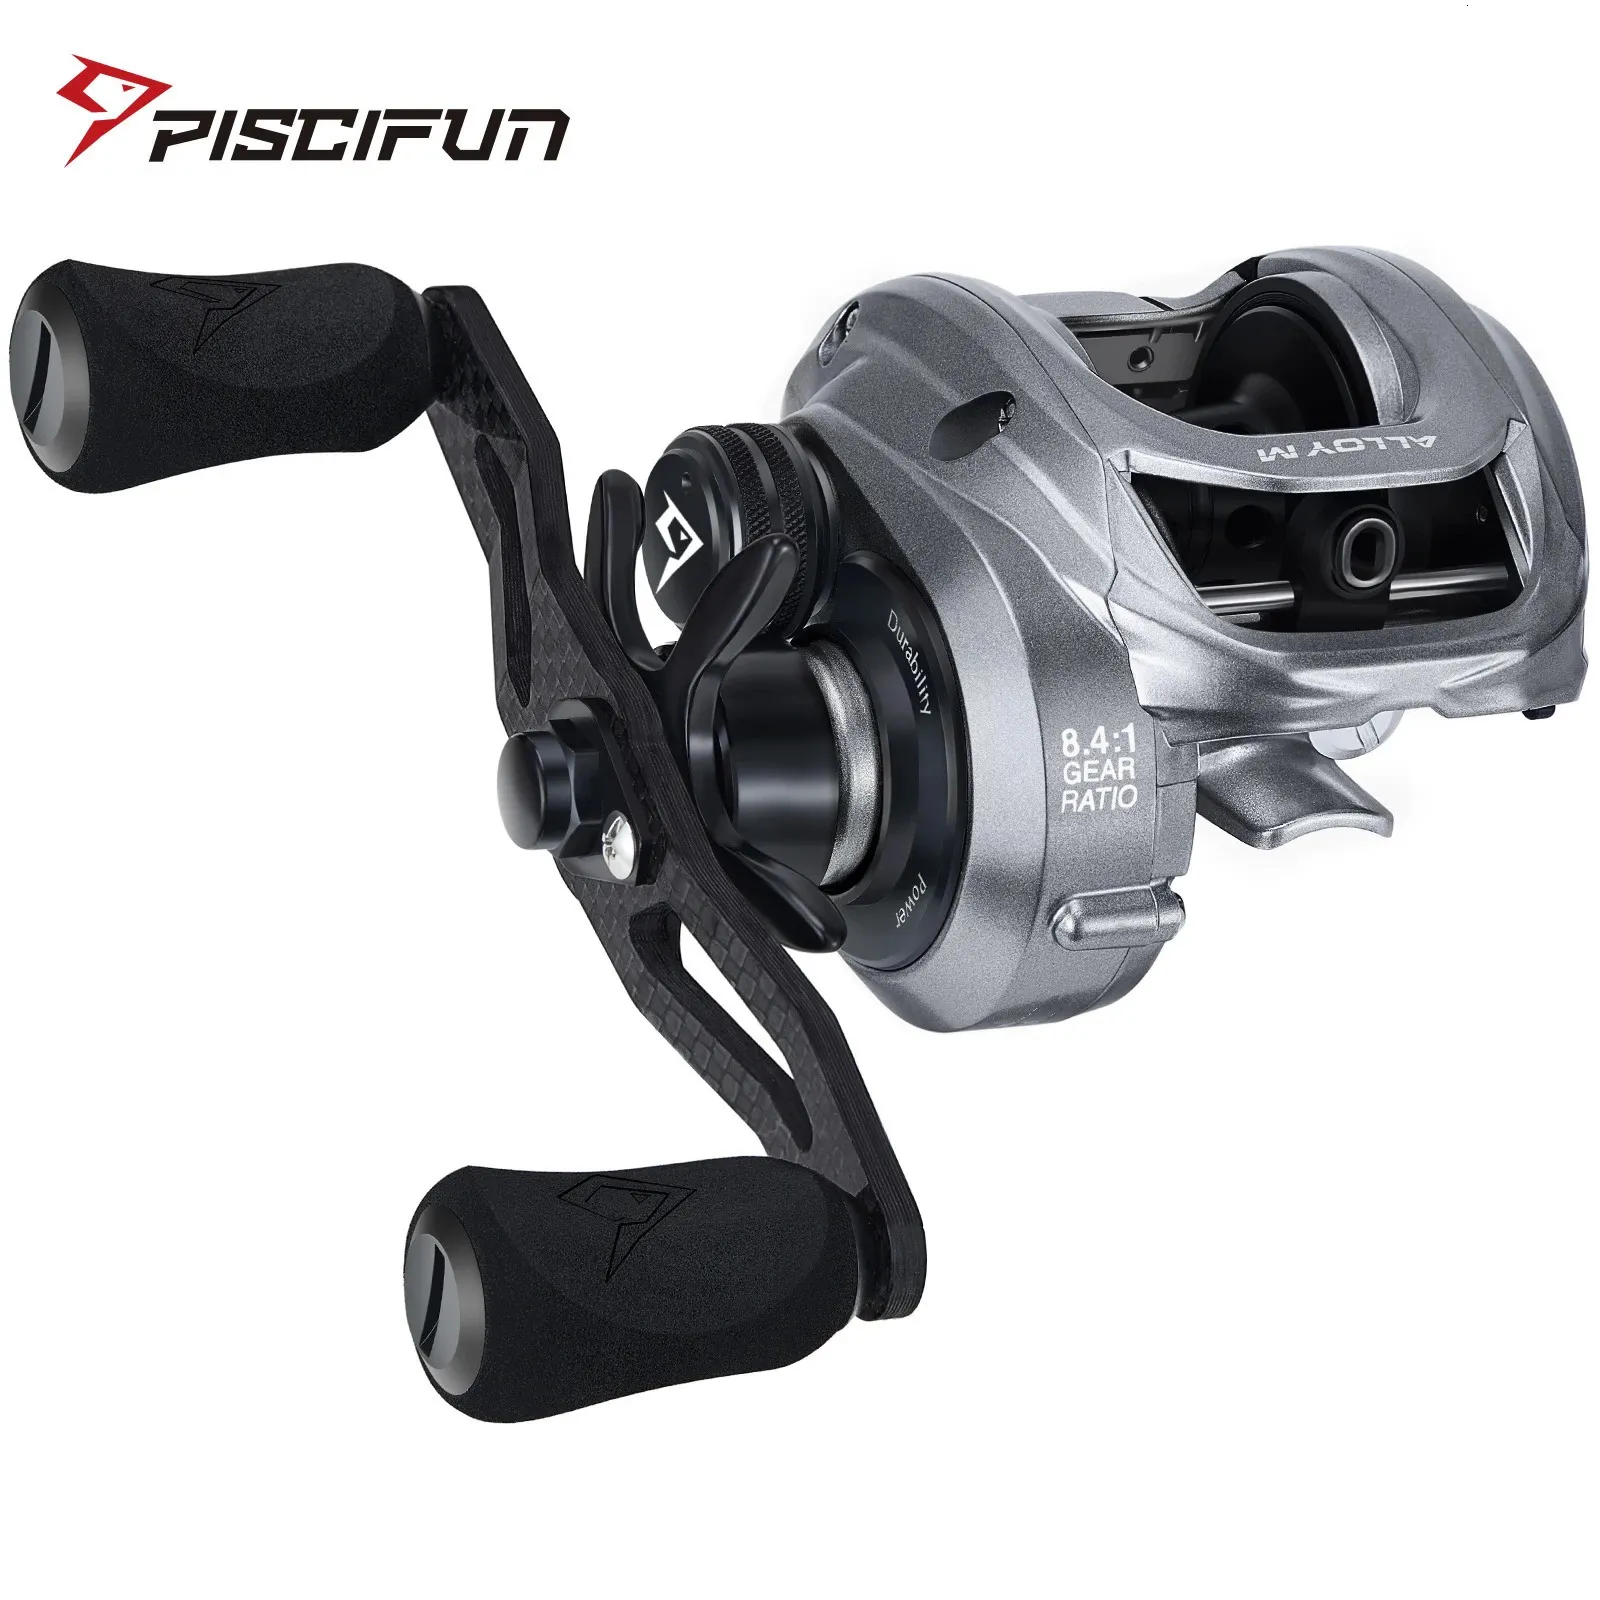 Piscifun Alloy M Metal Baitcasting Reel 10KG 22LB Max Drag with High Low Speed Shield Bearings Strong Salt Water Fishing 240108